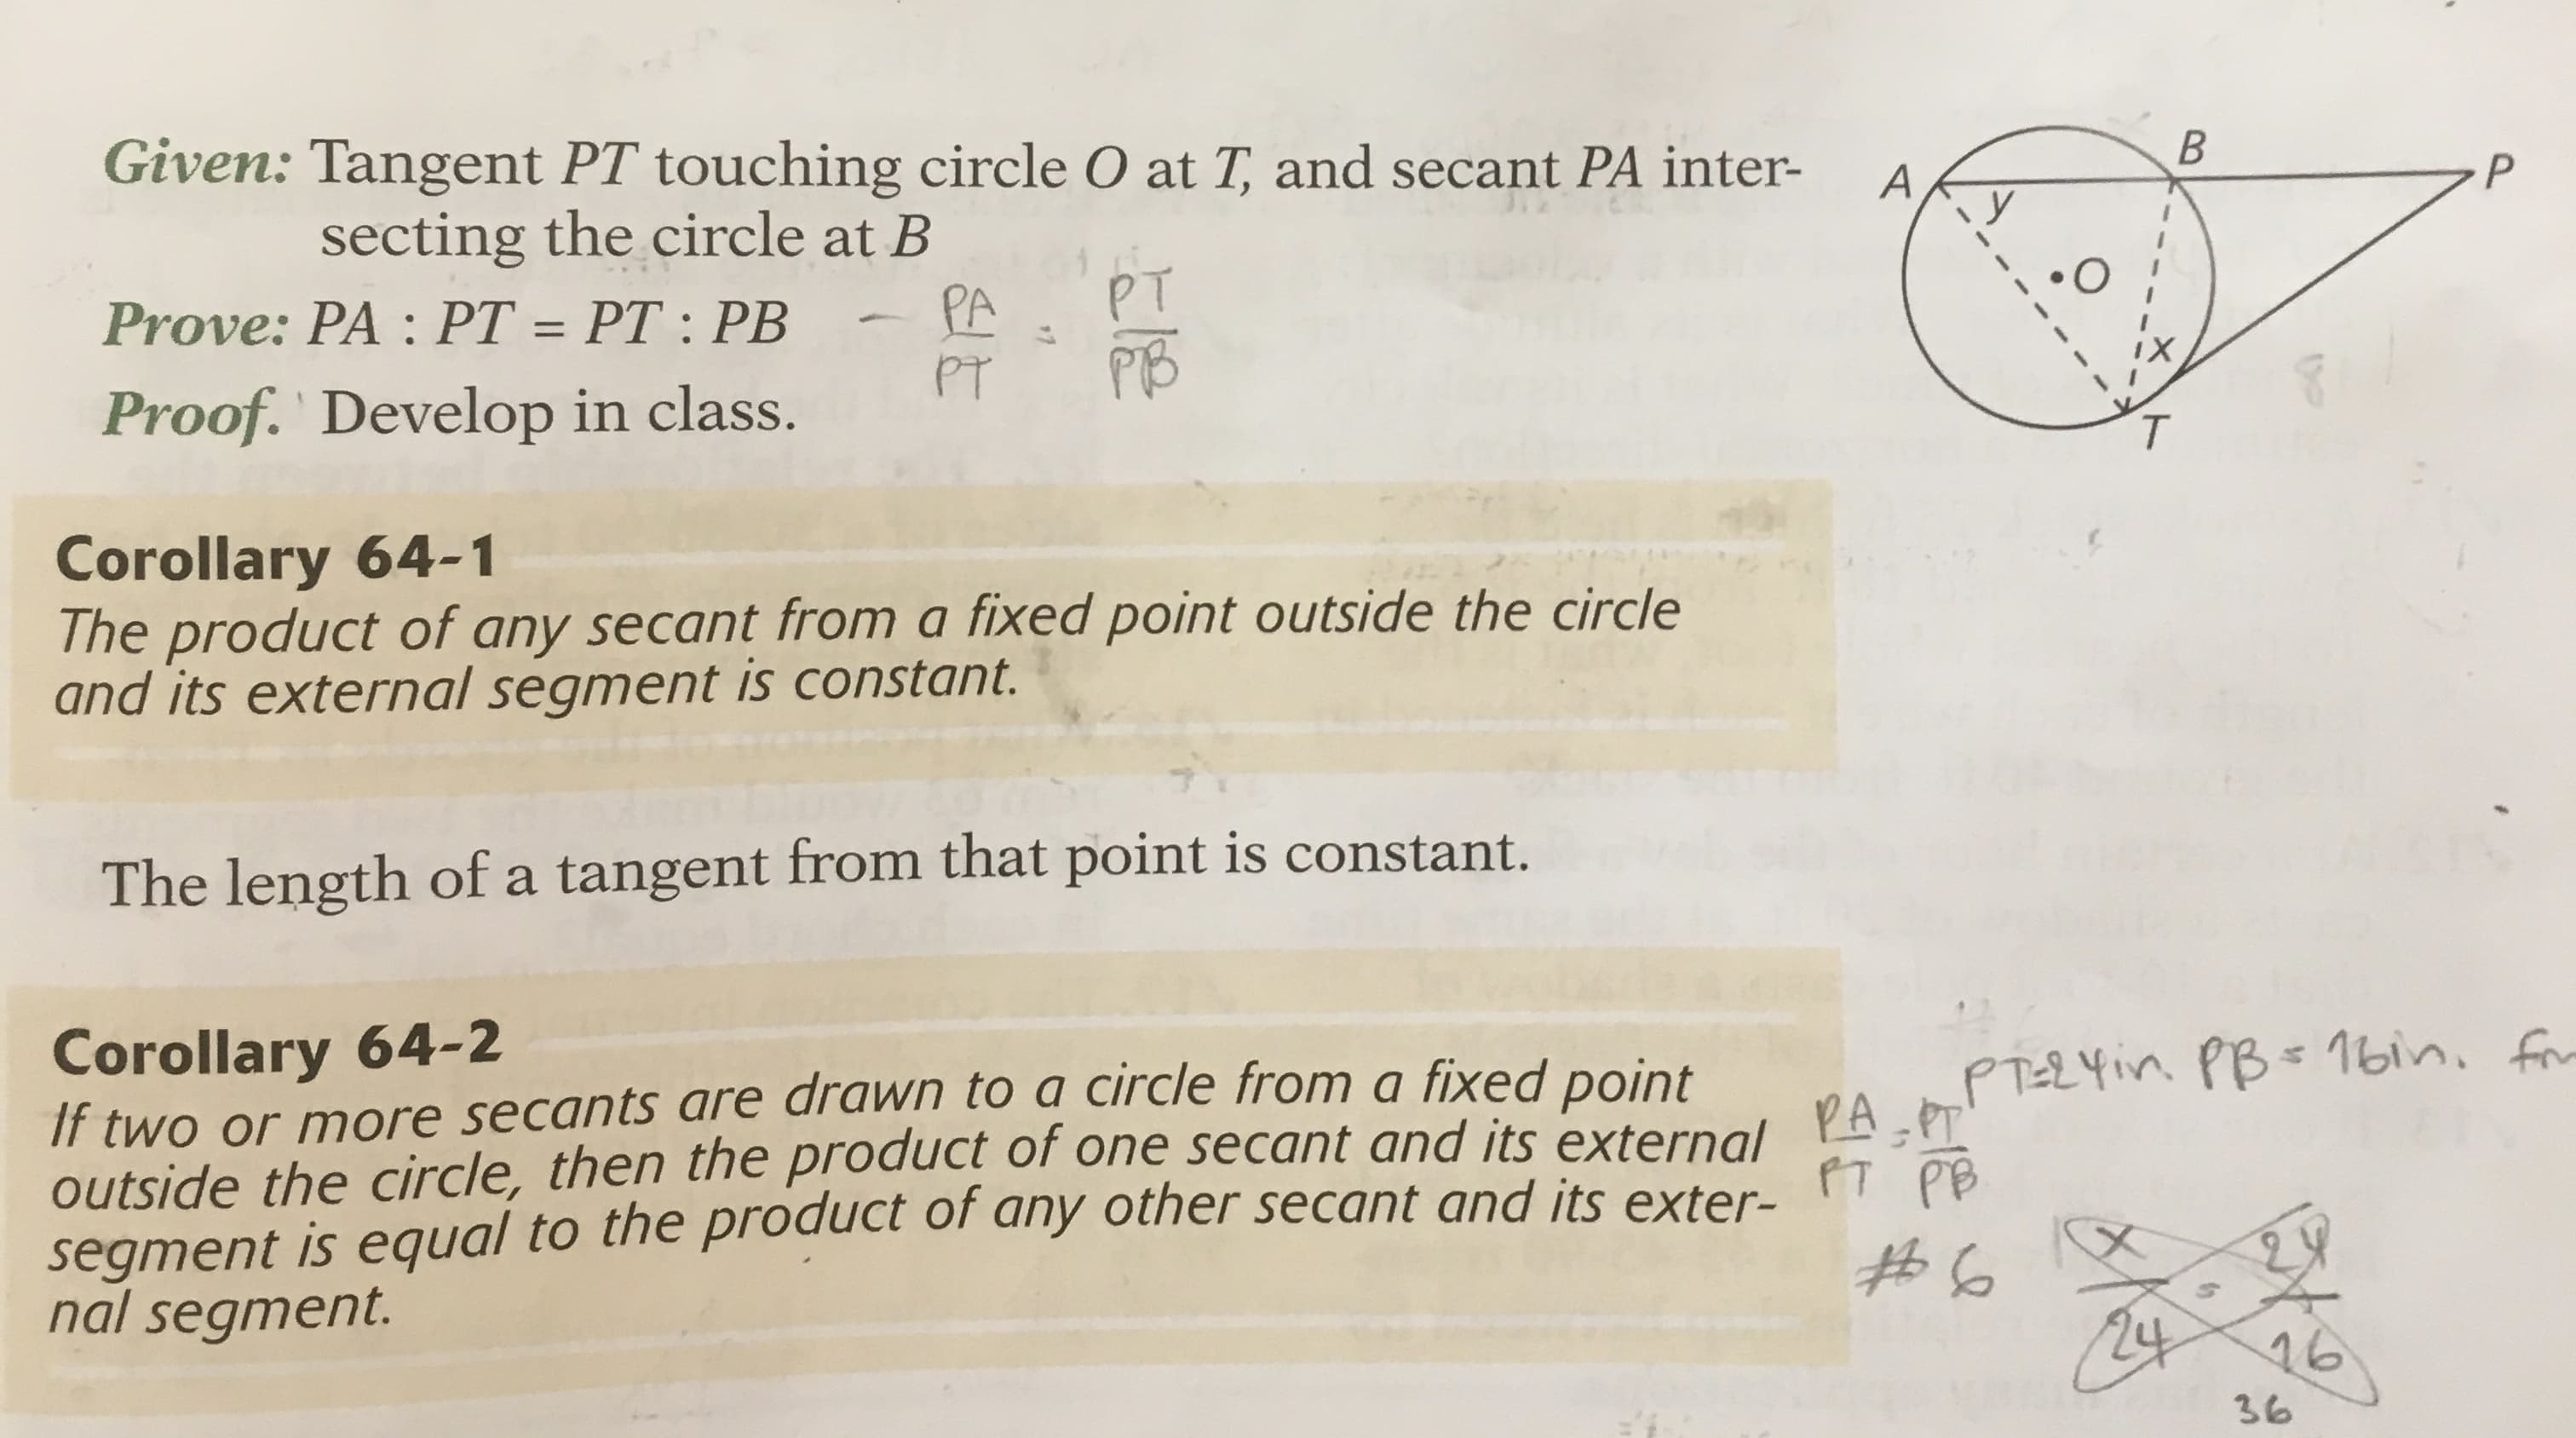 Given: Tangent PT touching circle O at T, and secant PA inter-
secting the circle at B
Prove: PA : PT = PT : PB
У
PT
PA
PT
%3D
Proof. Develop in class.
PB
T.
Corollary 64-1
The product of any secant from a fixed point outside the circle
and its external segment is constant.
The length of a tangent from that point is constant.
Corollary 64-2
If two or more secants are drawn to a circle from a fixed point
outside the circle, then the product of one secant and its external PA PT
segment is equal to the product of any other secant and its exter-
nal segment.
PTEZYin PB= 1bin, for
PT PB
24
16
36
